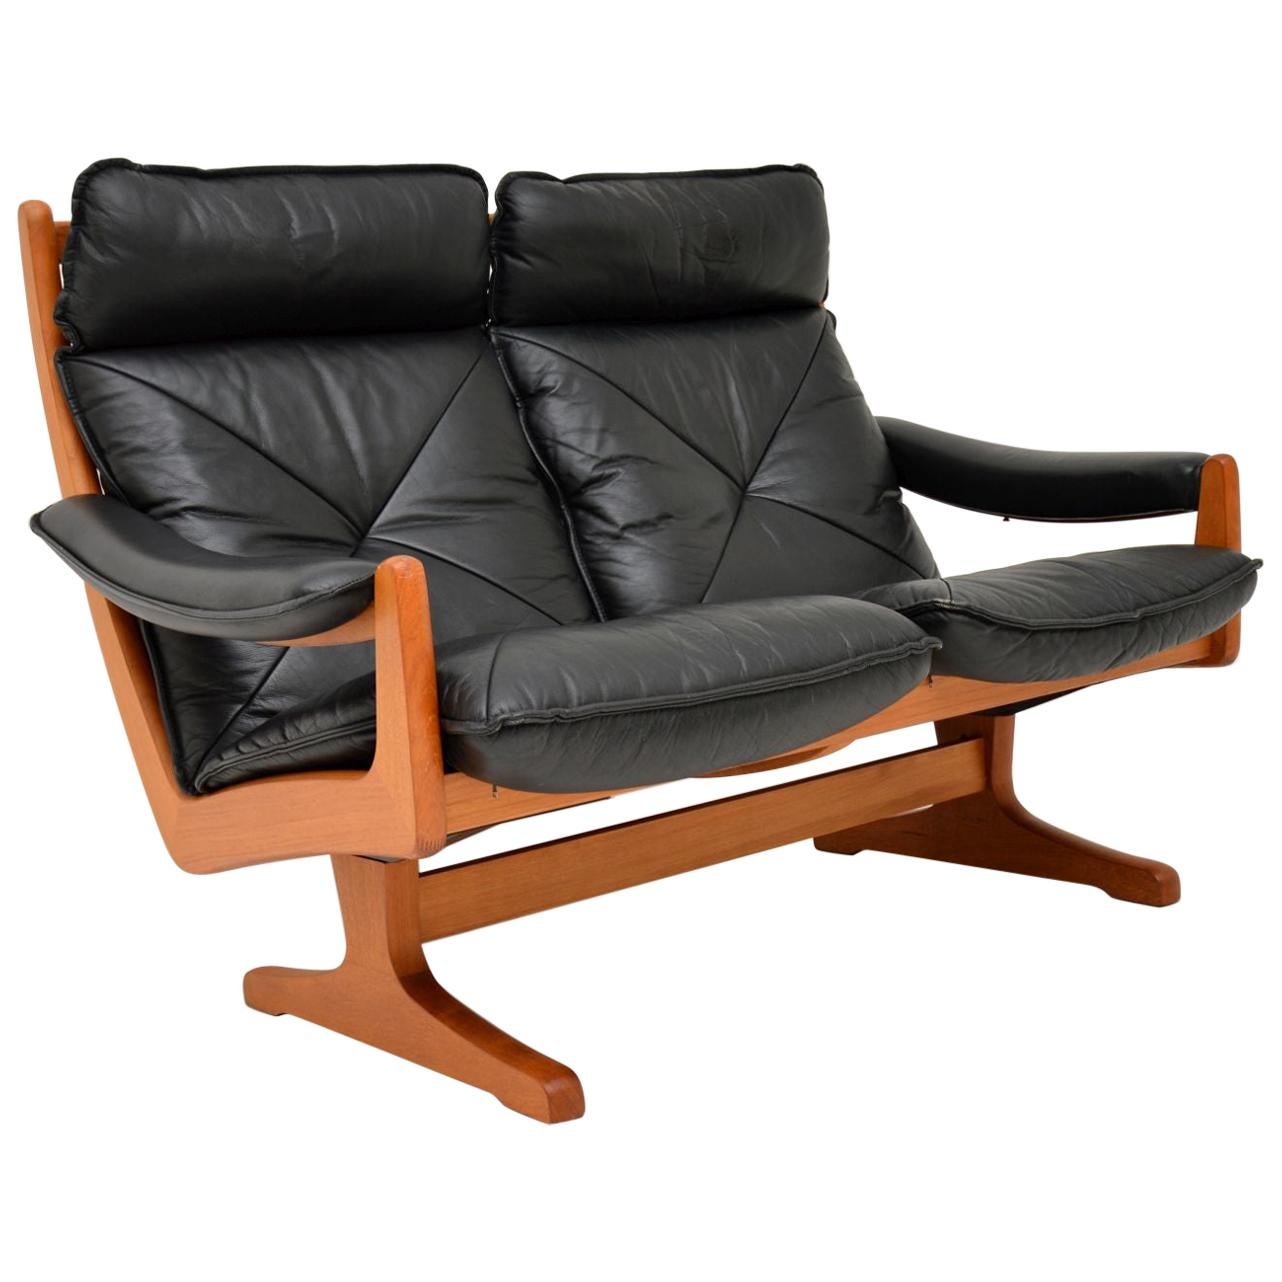 1970s Vintage Teak and Leather Sofa by Soda Galvano